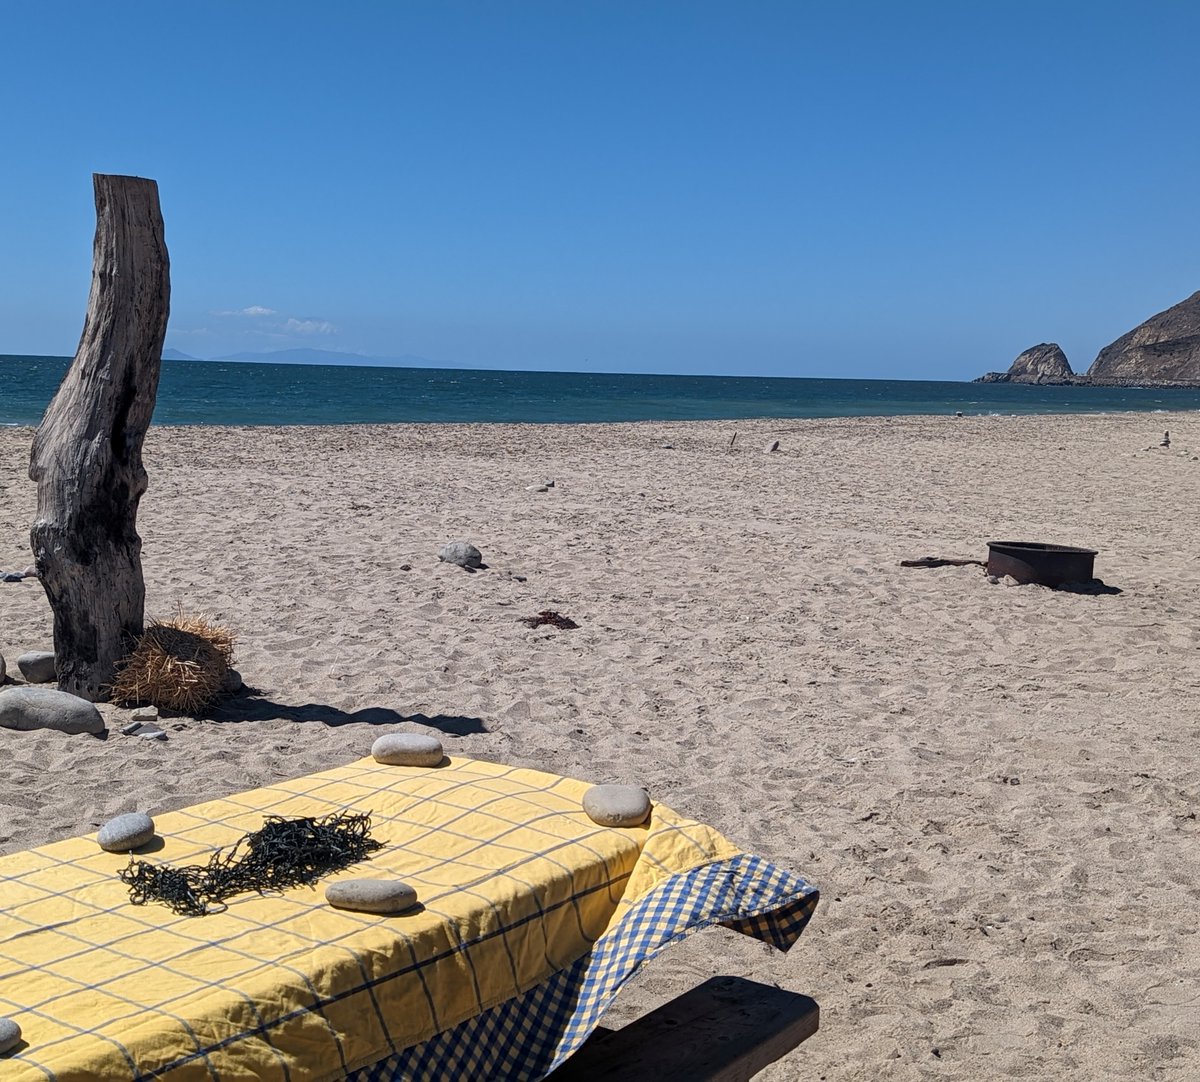 Jealous... just set up the campsite for the wife and her mom. Good news - get to go and chill and the beach at the weekend, even better news - get to drink and cook at the beach at the weekend!

#beach #camping #smokinghotdad #beachcamping #trailercamping #socalcamping #oceanview